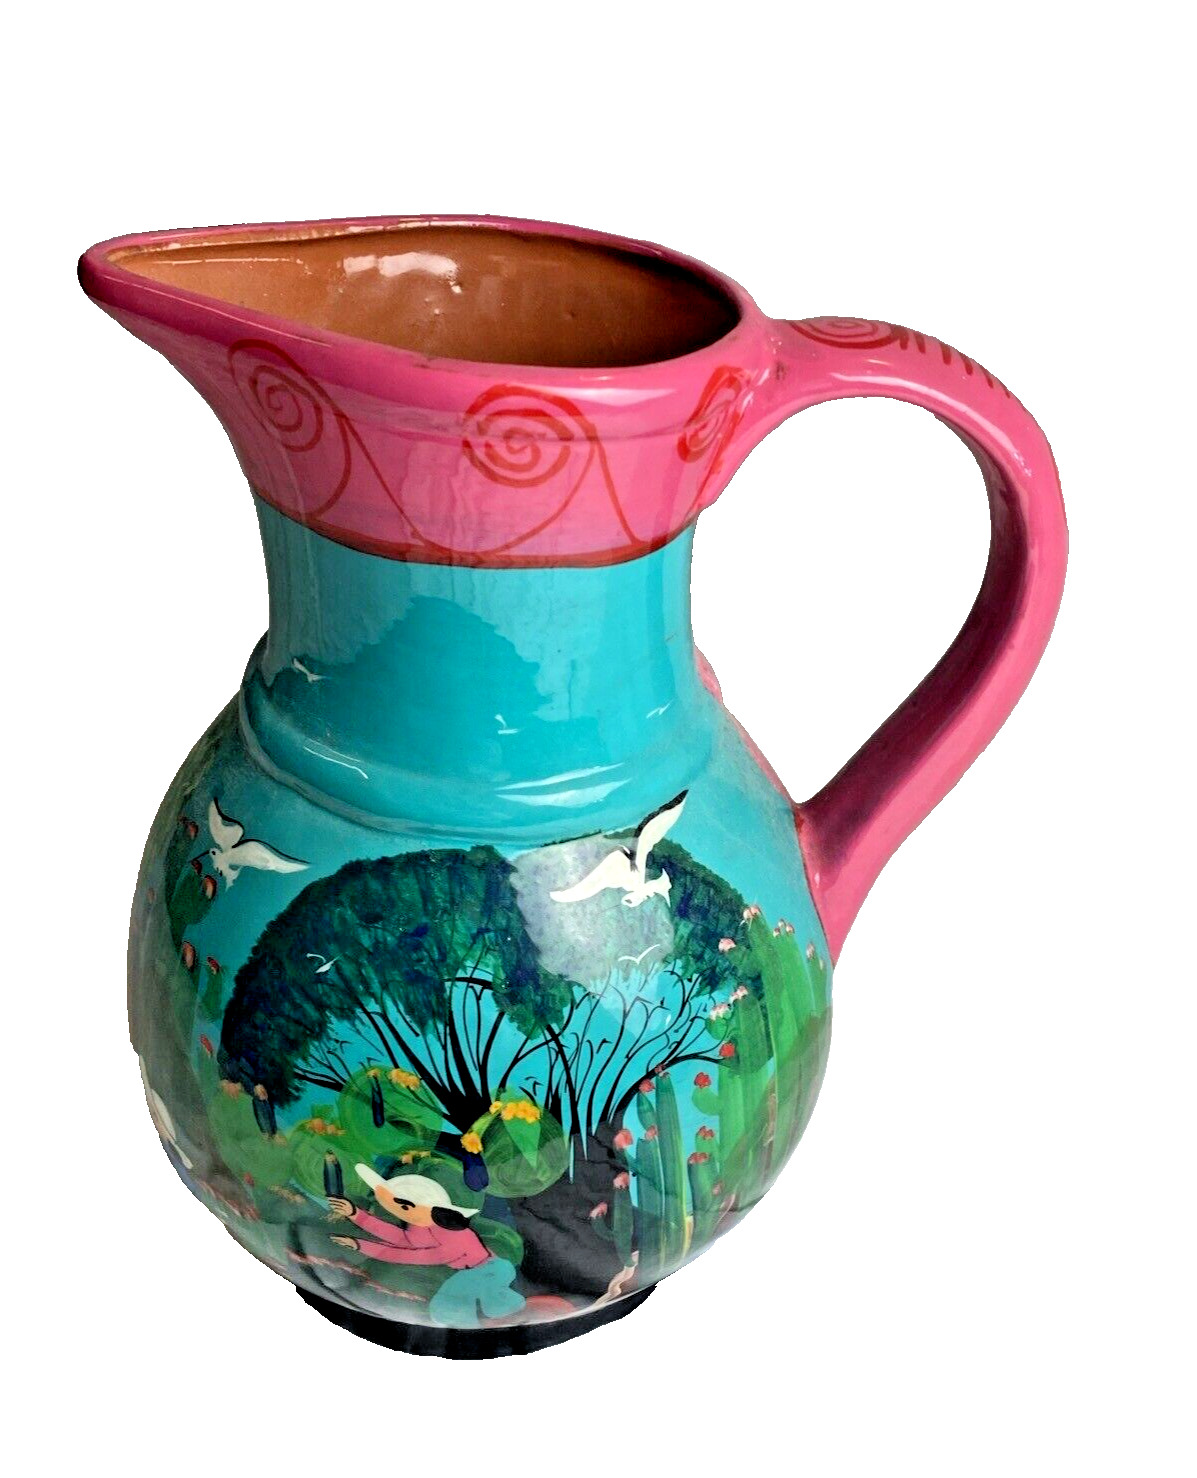 LARGE HAND PAINTED MEXICAN TERRA COTTA PITCHER